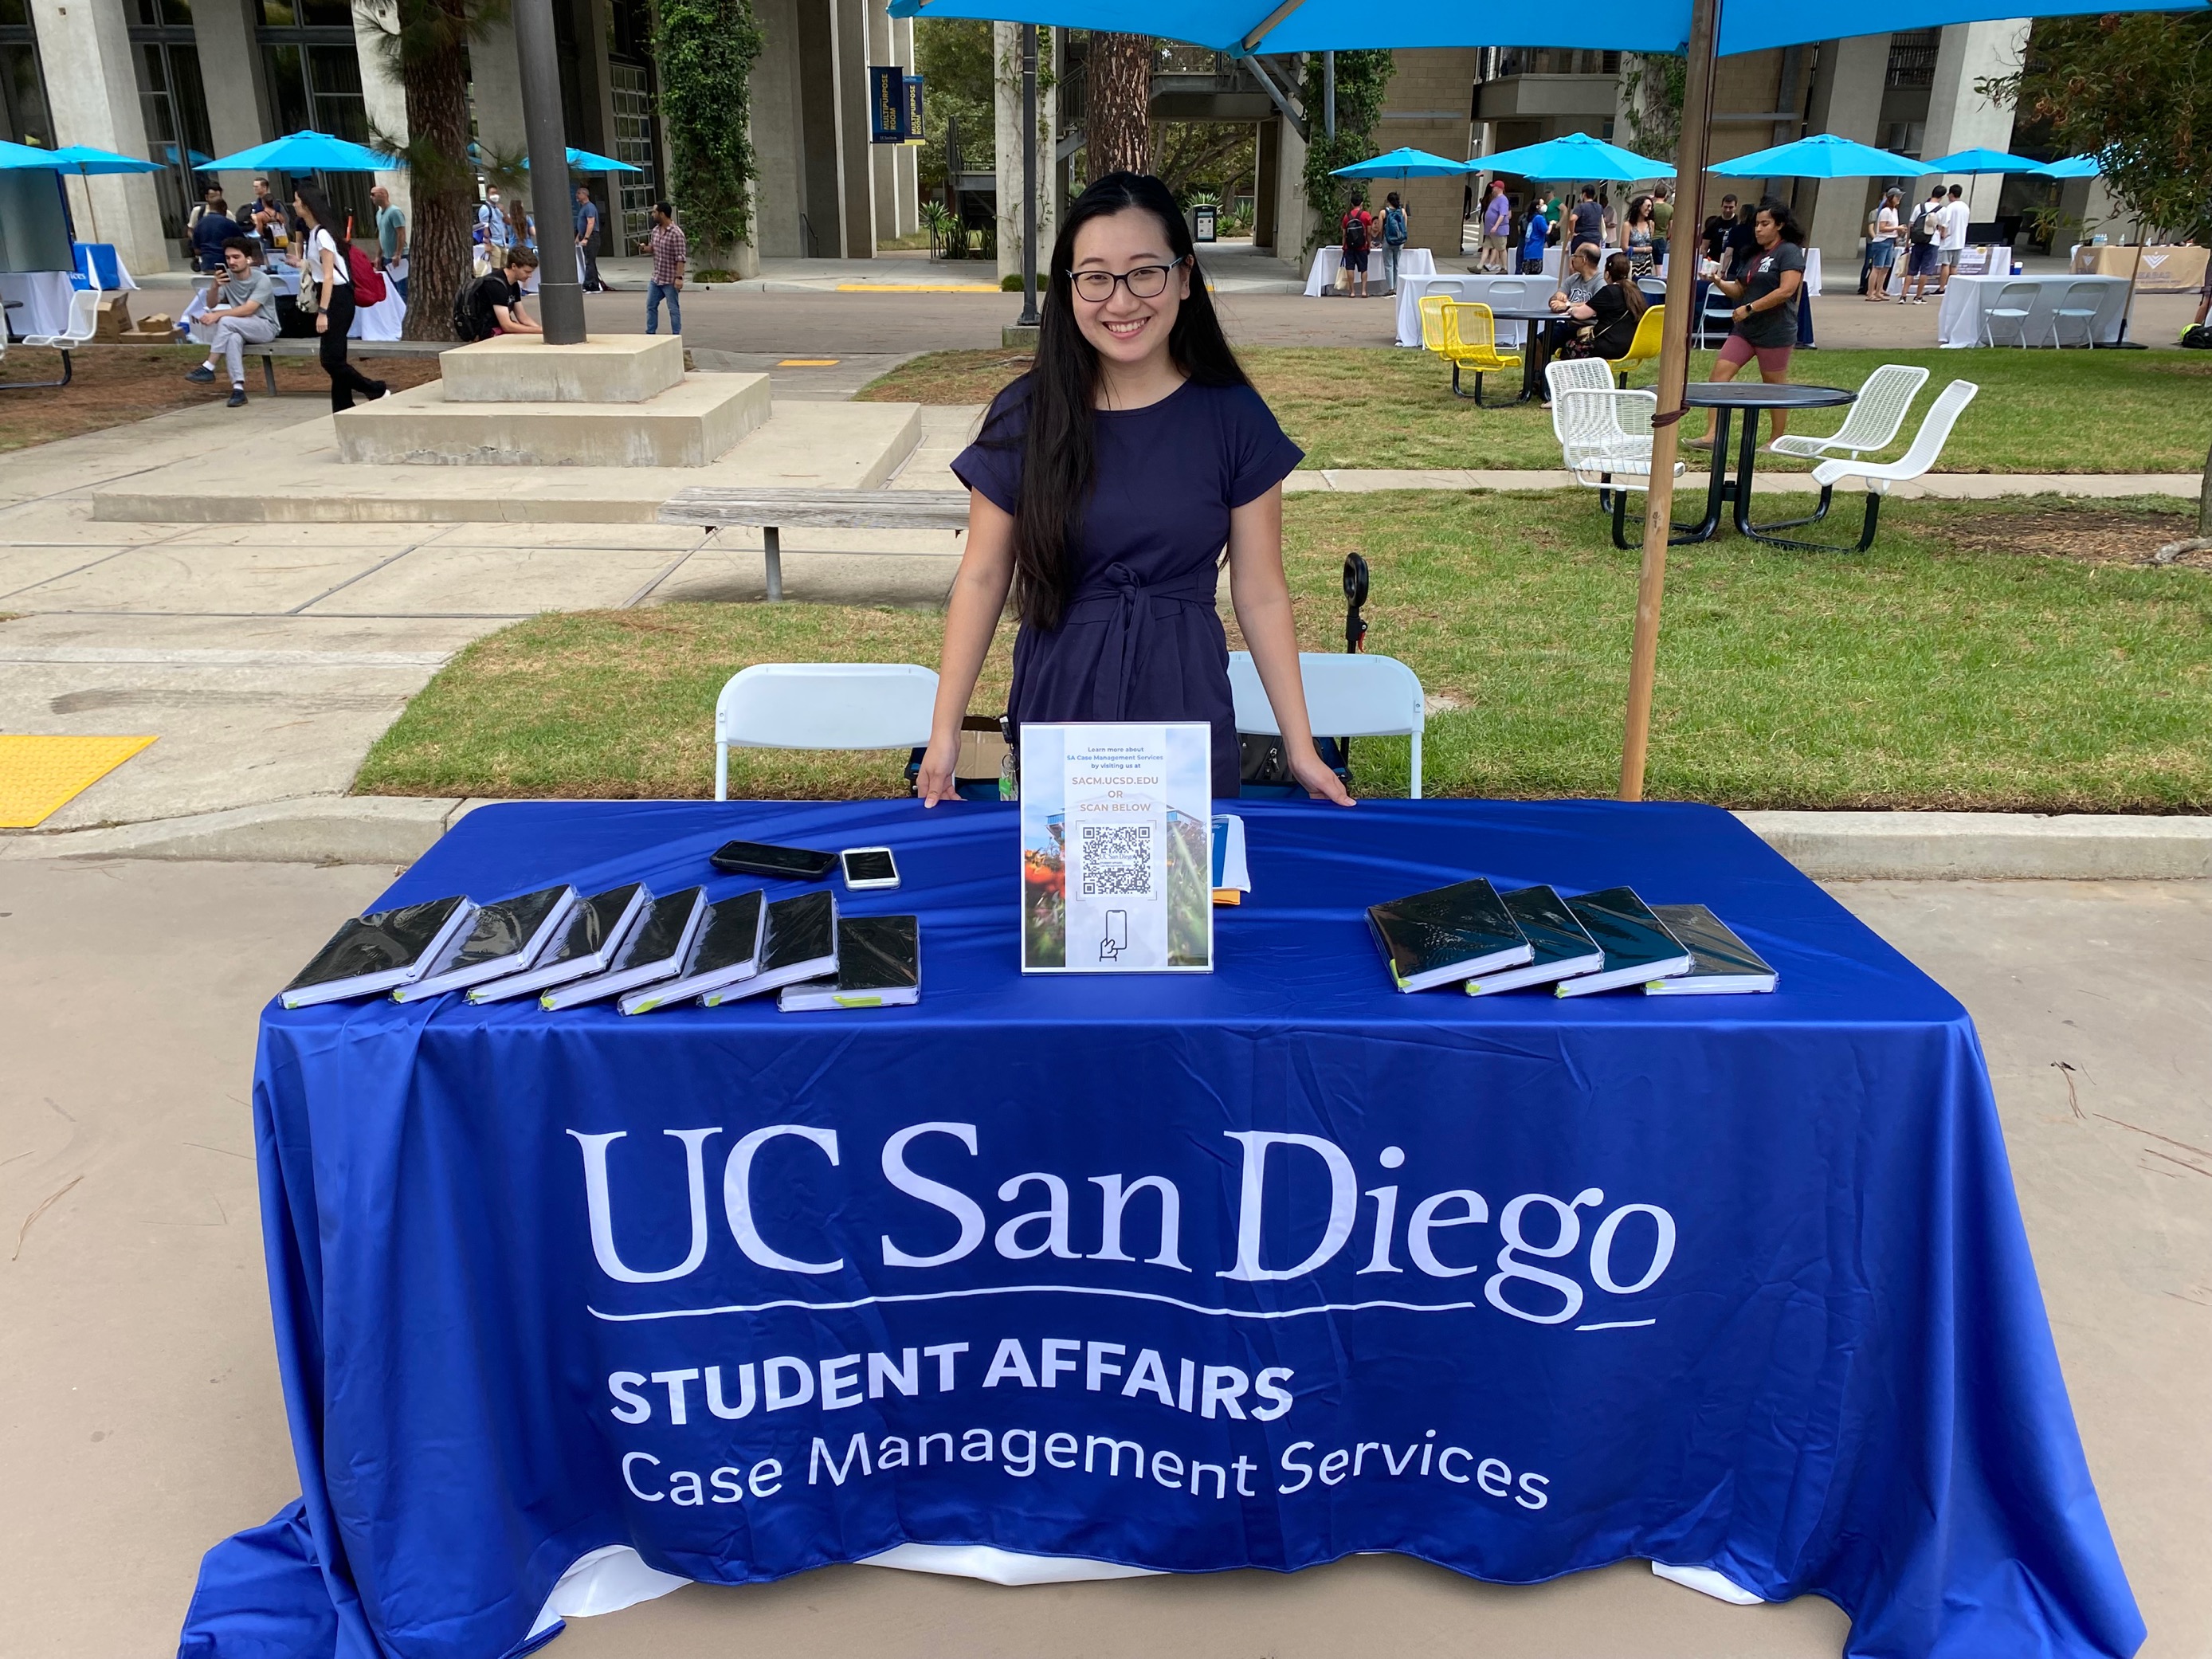 Student Affairs Case Management Services program at the University of California, San Diego